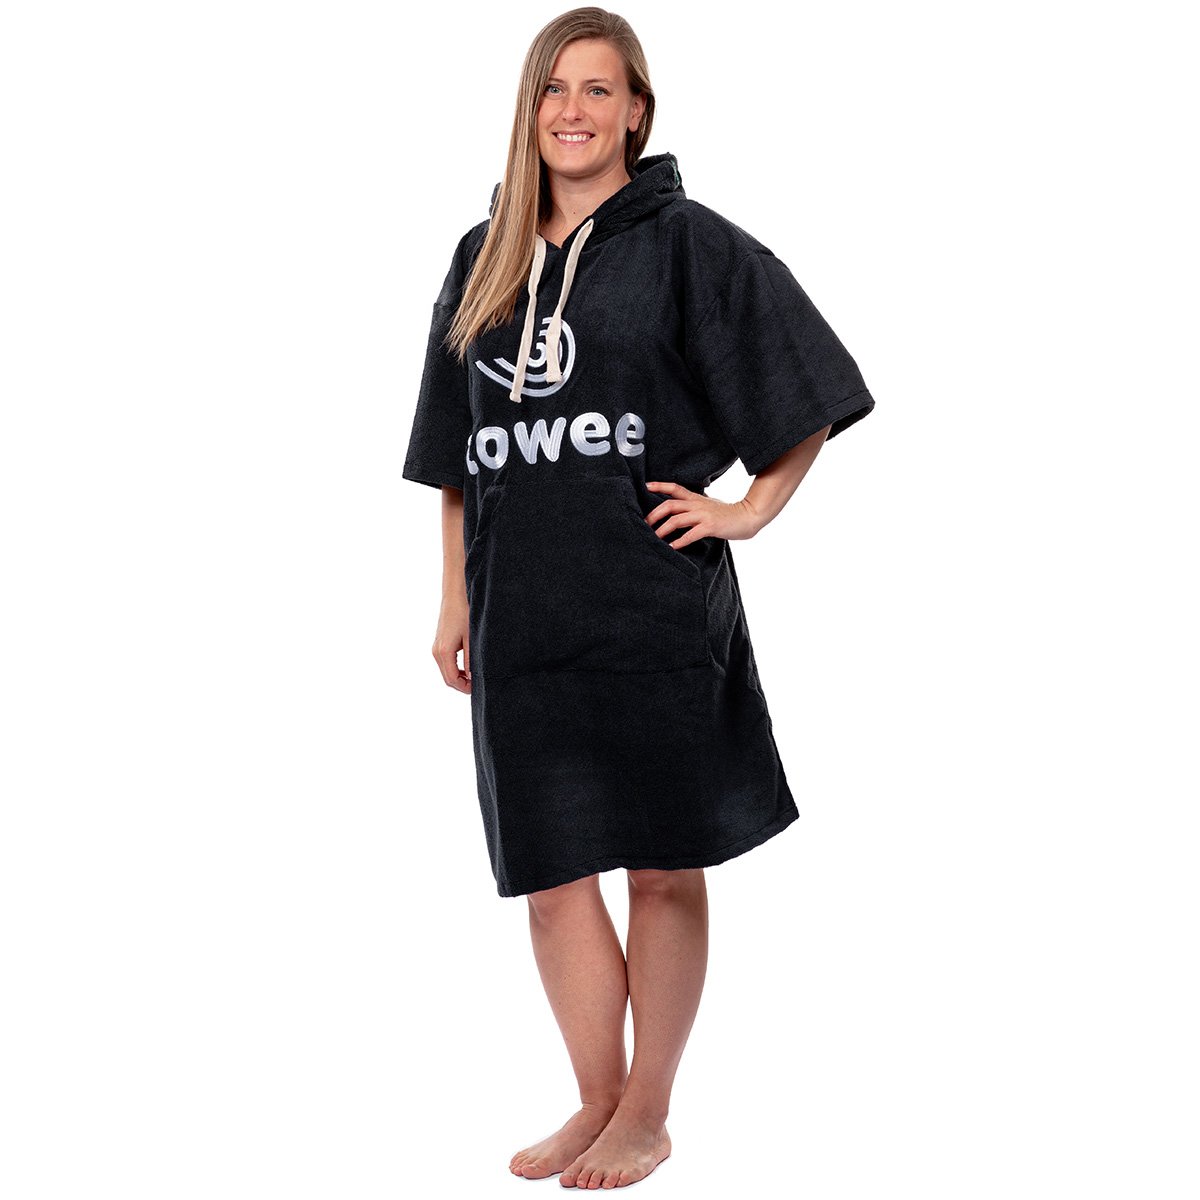 Surf poncho Towee anthracite with white embroidery, 70 x 100 cm